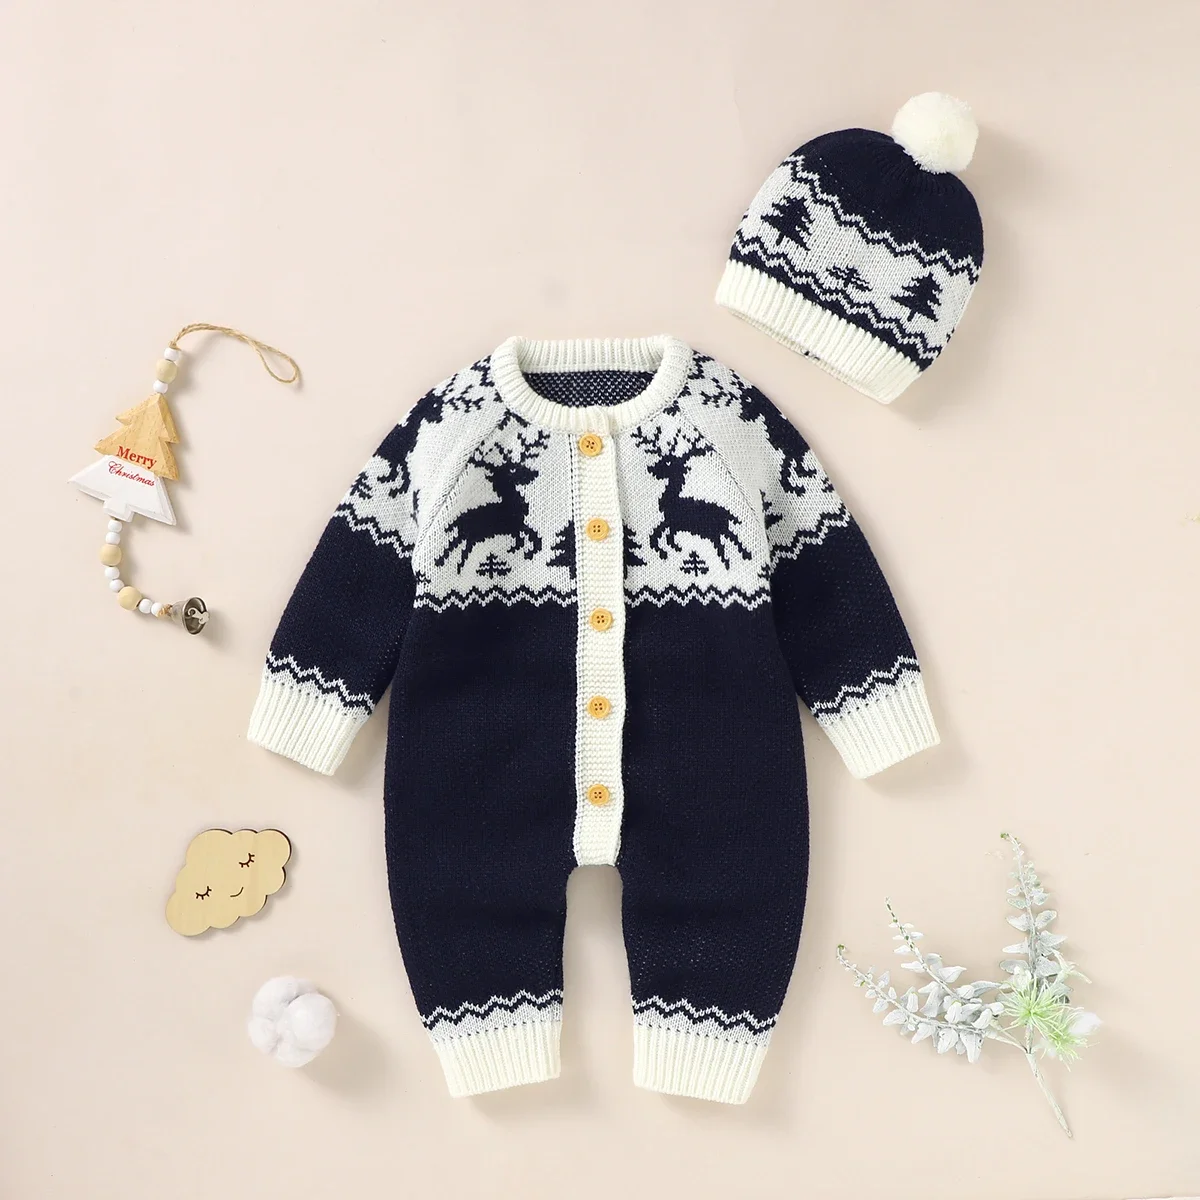 

Baby Christmas Rompers Long Sleeve Newborn Infant Unisex Jumpsuits Hats 2pcs Clohes Sets 0-18m Knitted Toddler Children Costumes